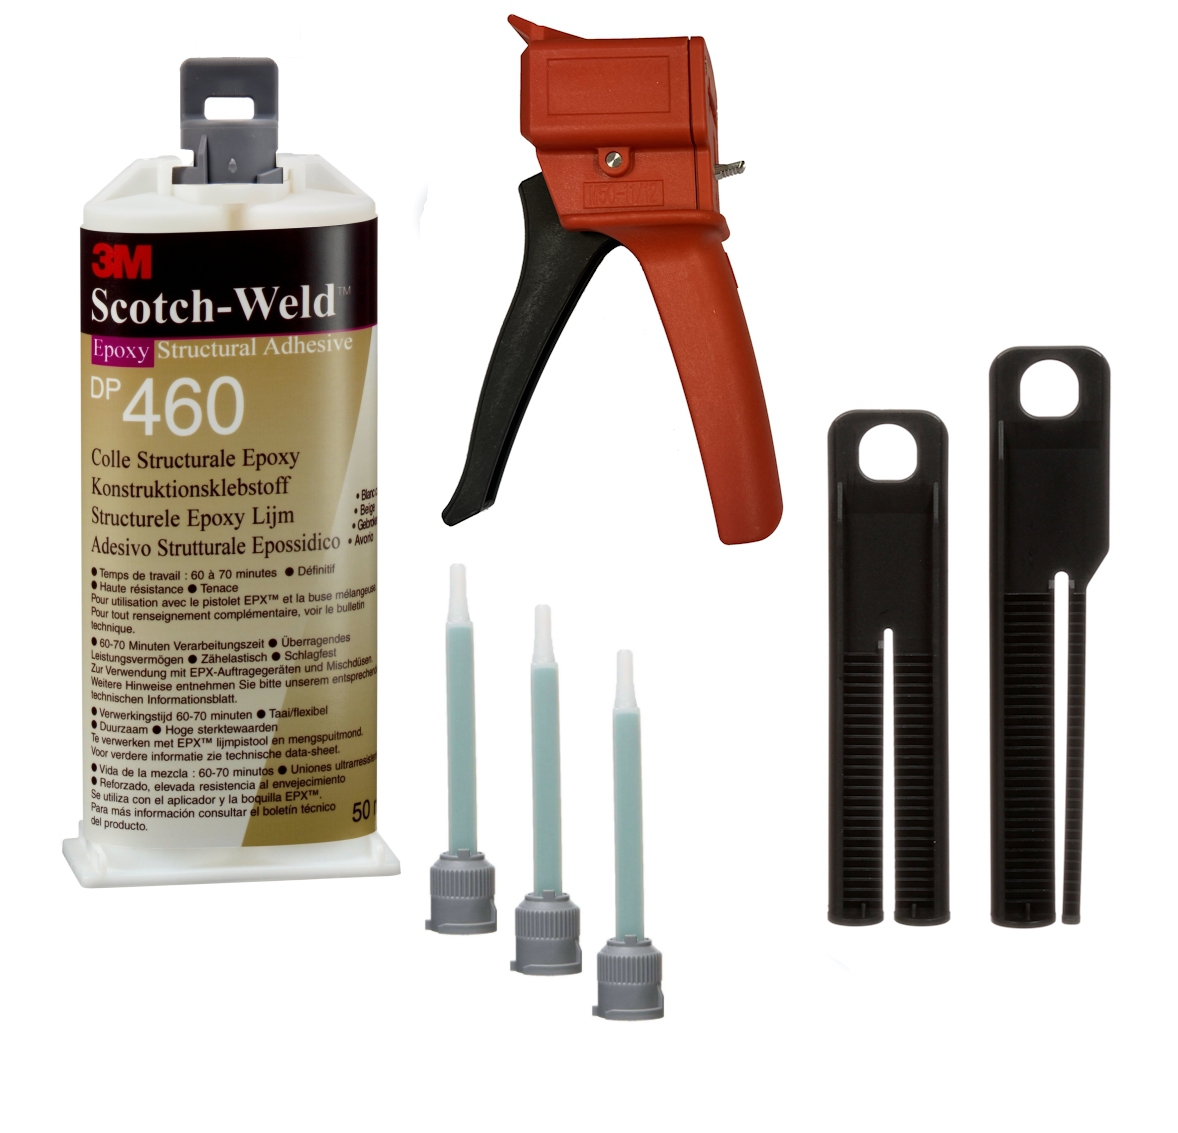 Starter set: 1x 3M Scotch-Weld 2-component construction adhesive EPX System DP460, beige, 50 ml, 1x S-K-S hand tool for EPX 38 to 50 ml cartridges incl. feed piston 2:1